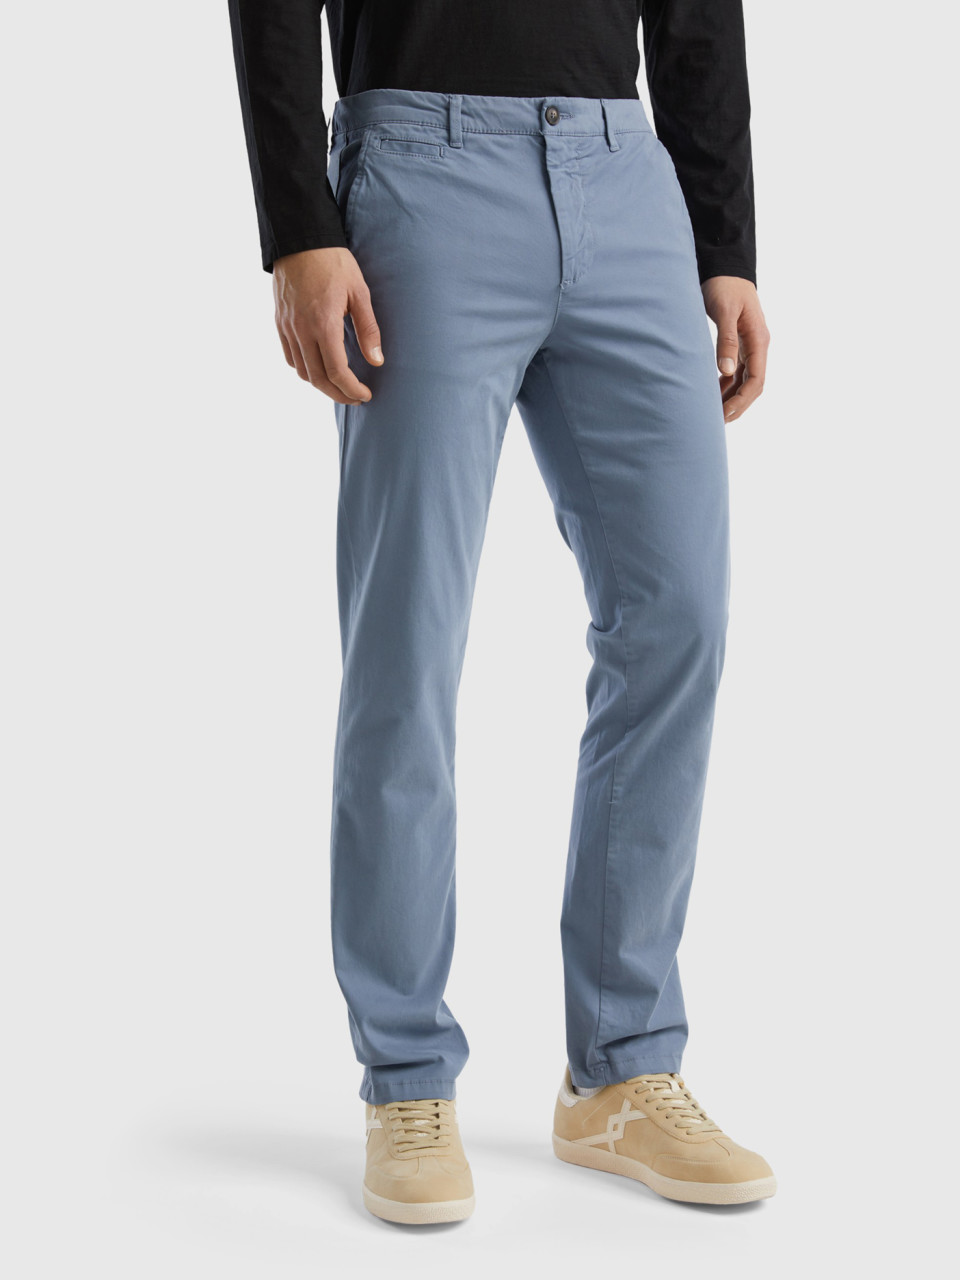 Benetton, Air Force Blue Slim Fit Chinos, Air Force Blue, Men